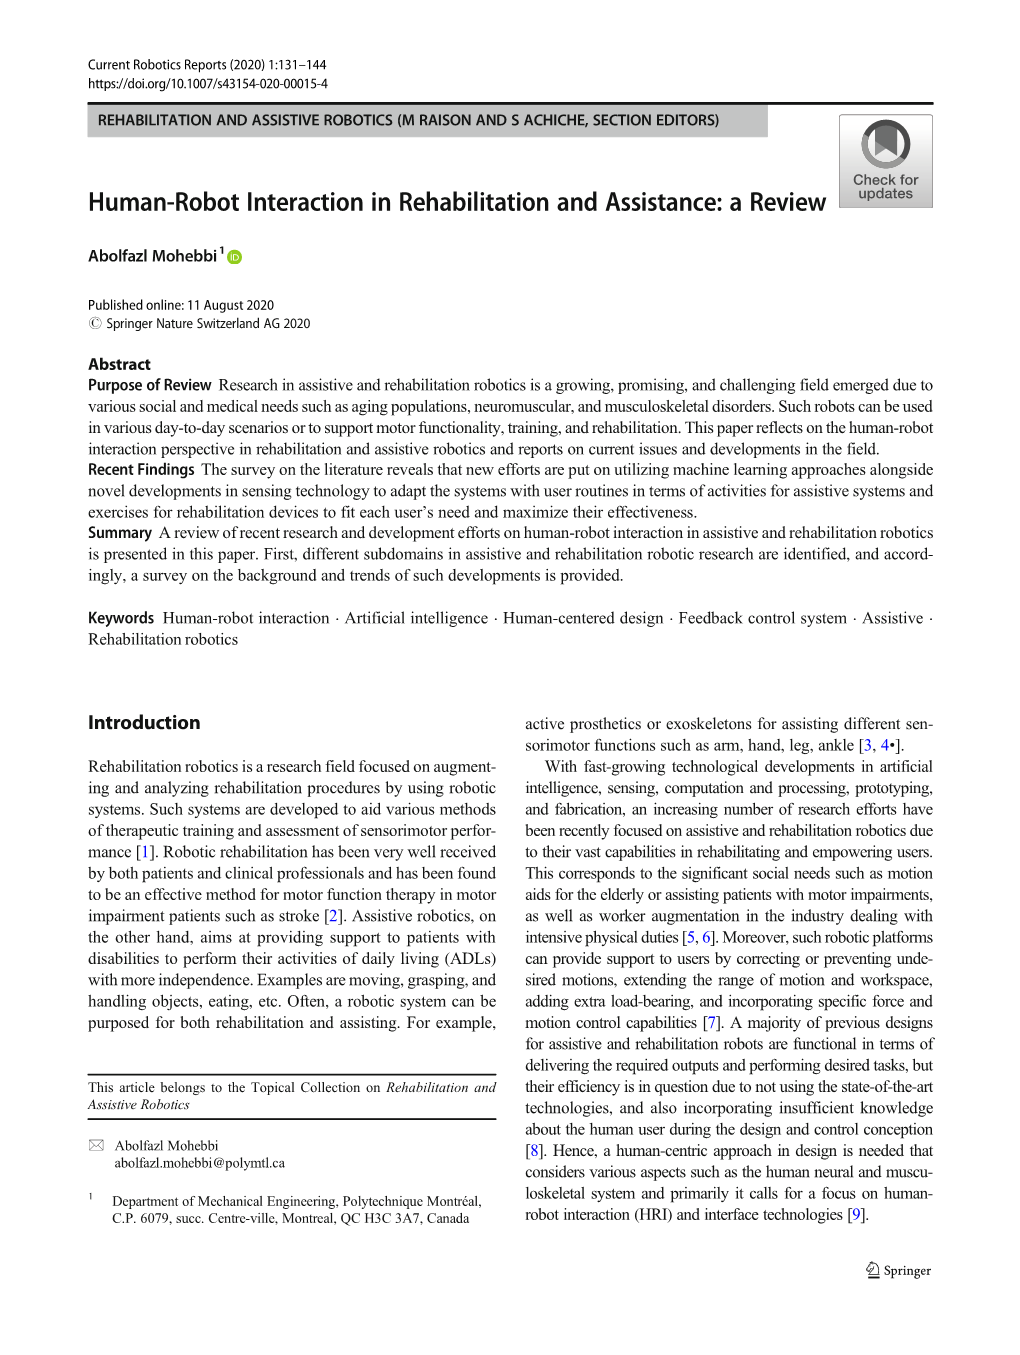 Human-Robot Interaction in Rehabilitation and Assistance: a Review